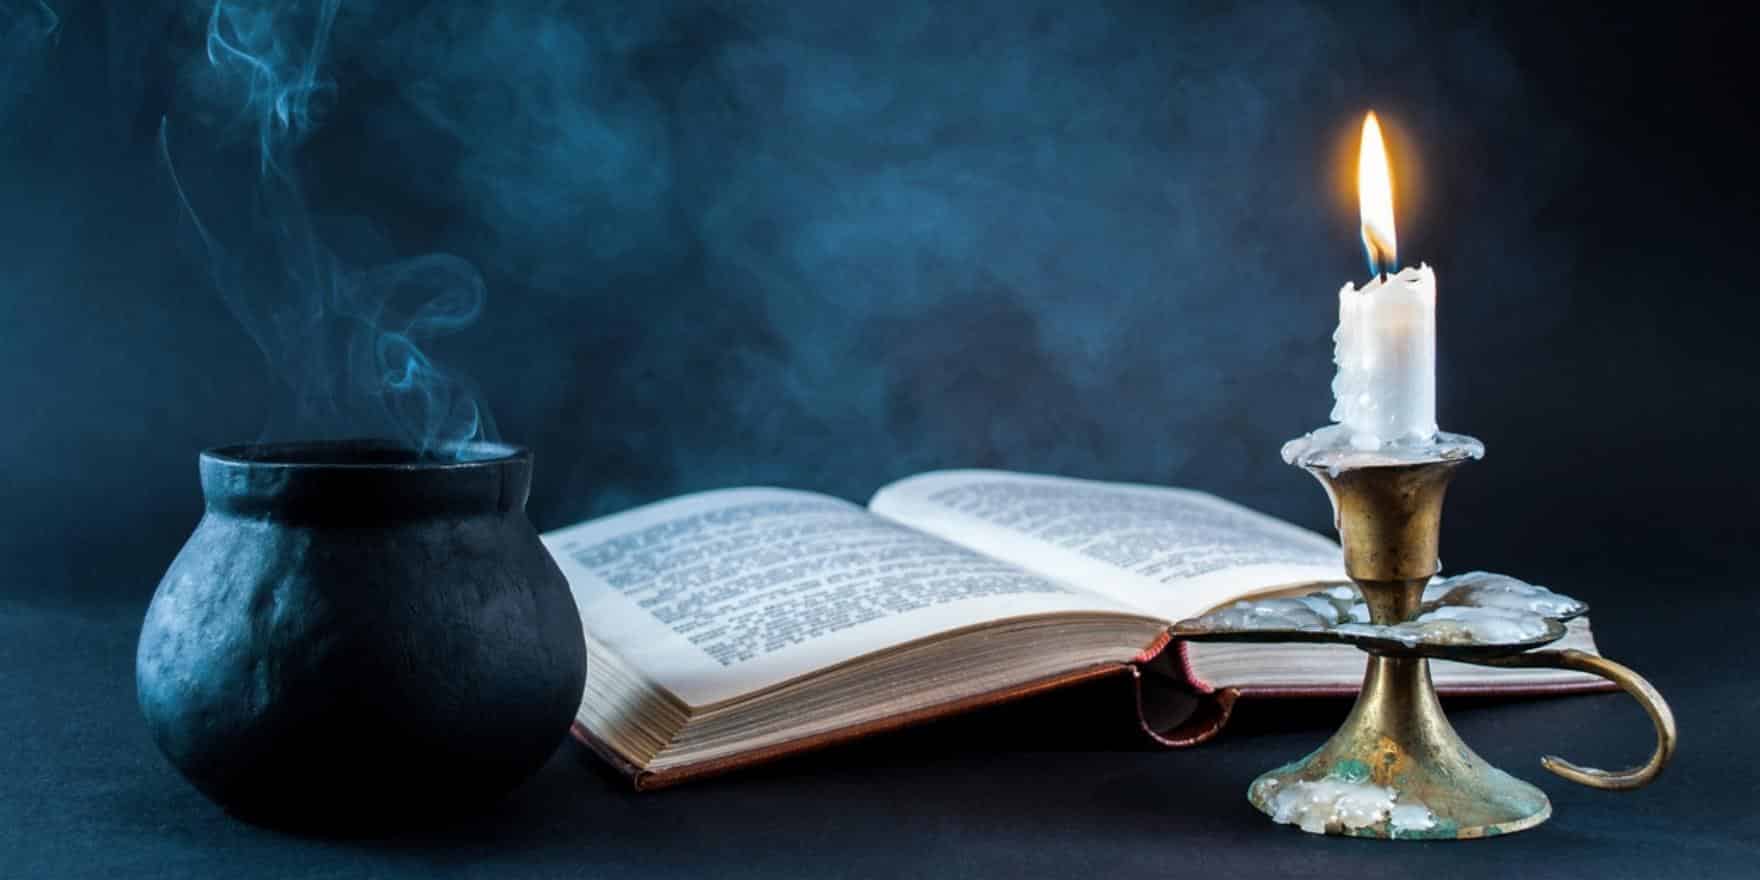 A book, candle, and cauldron on a table